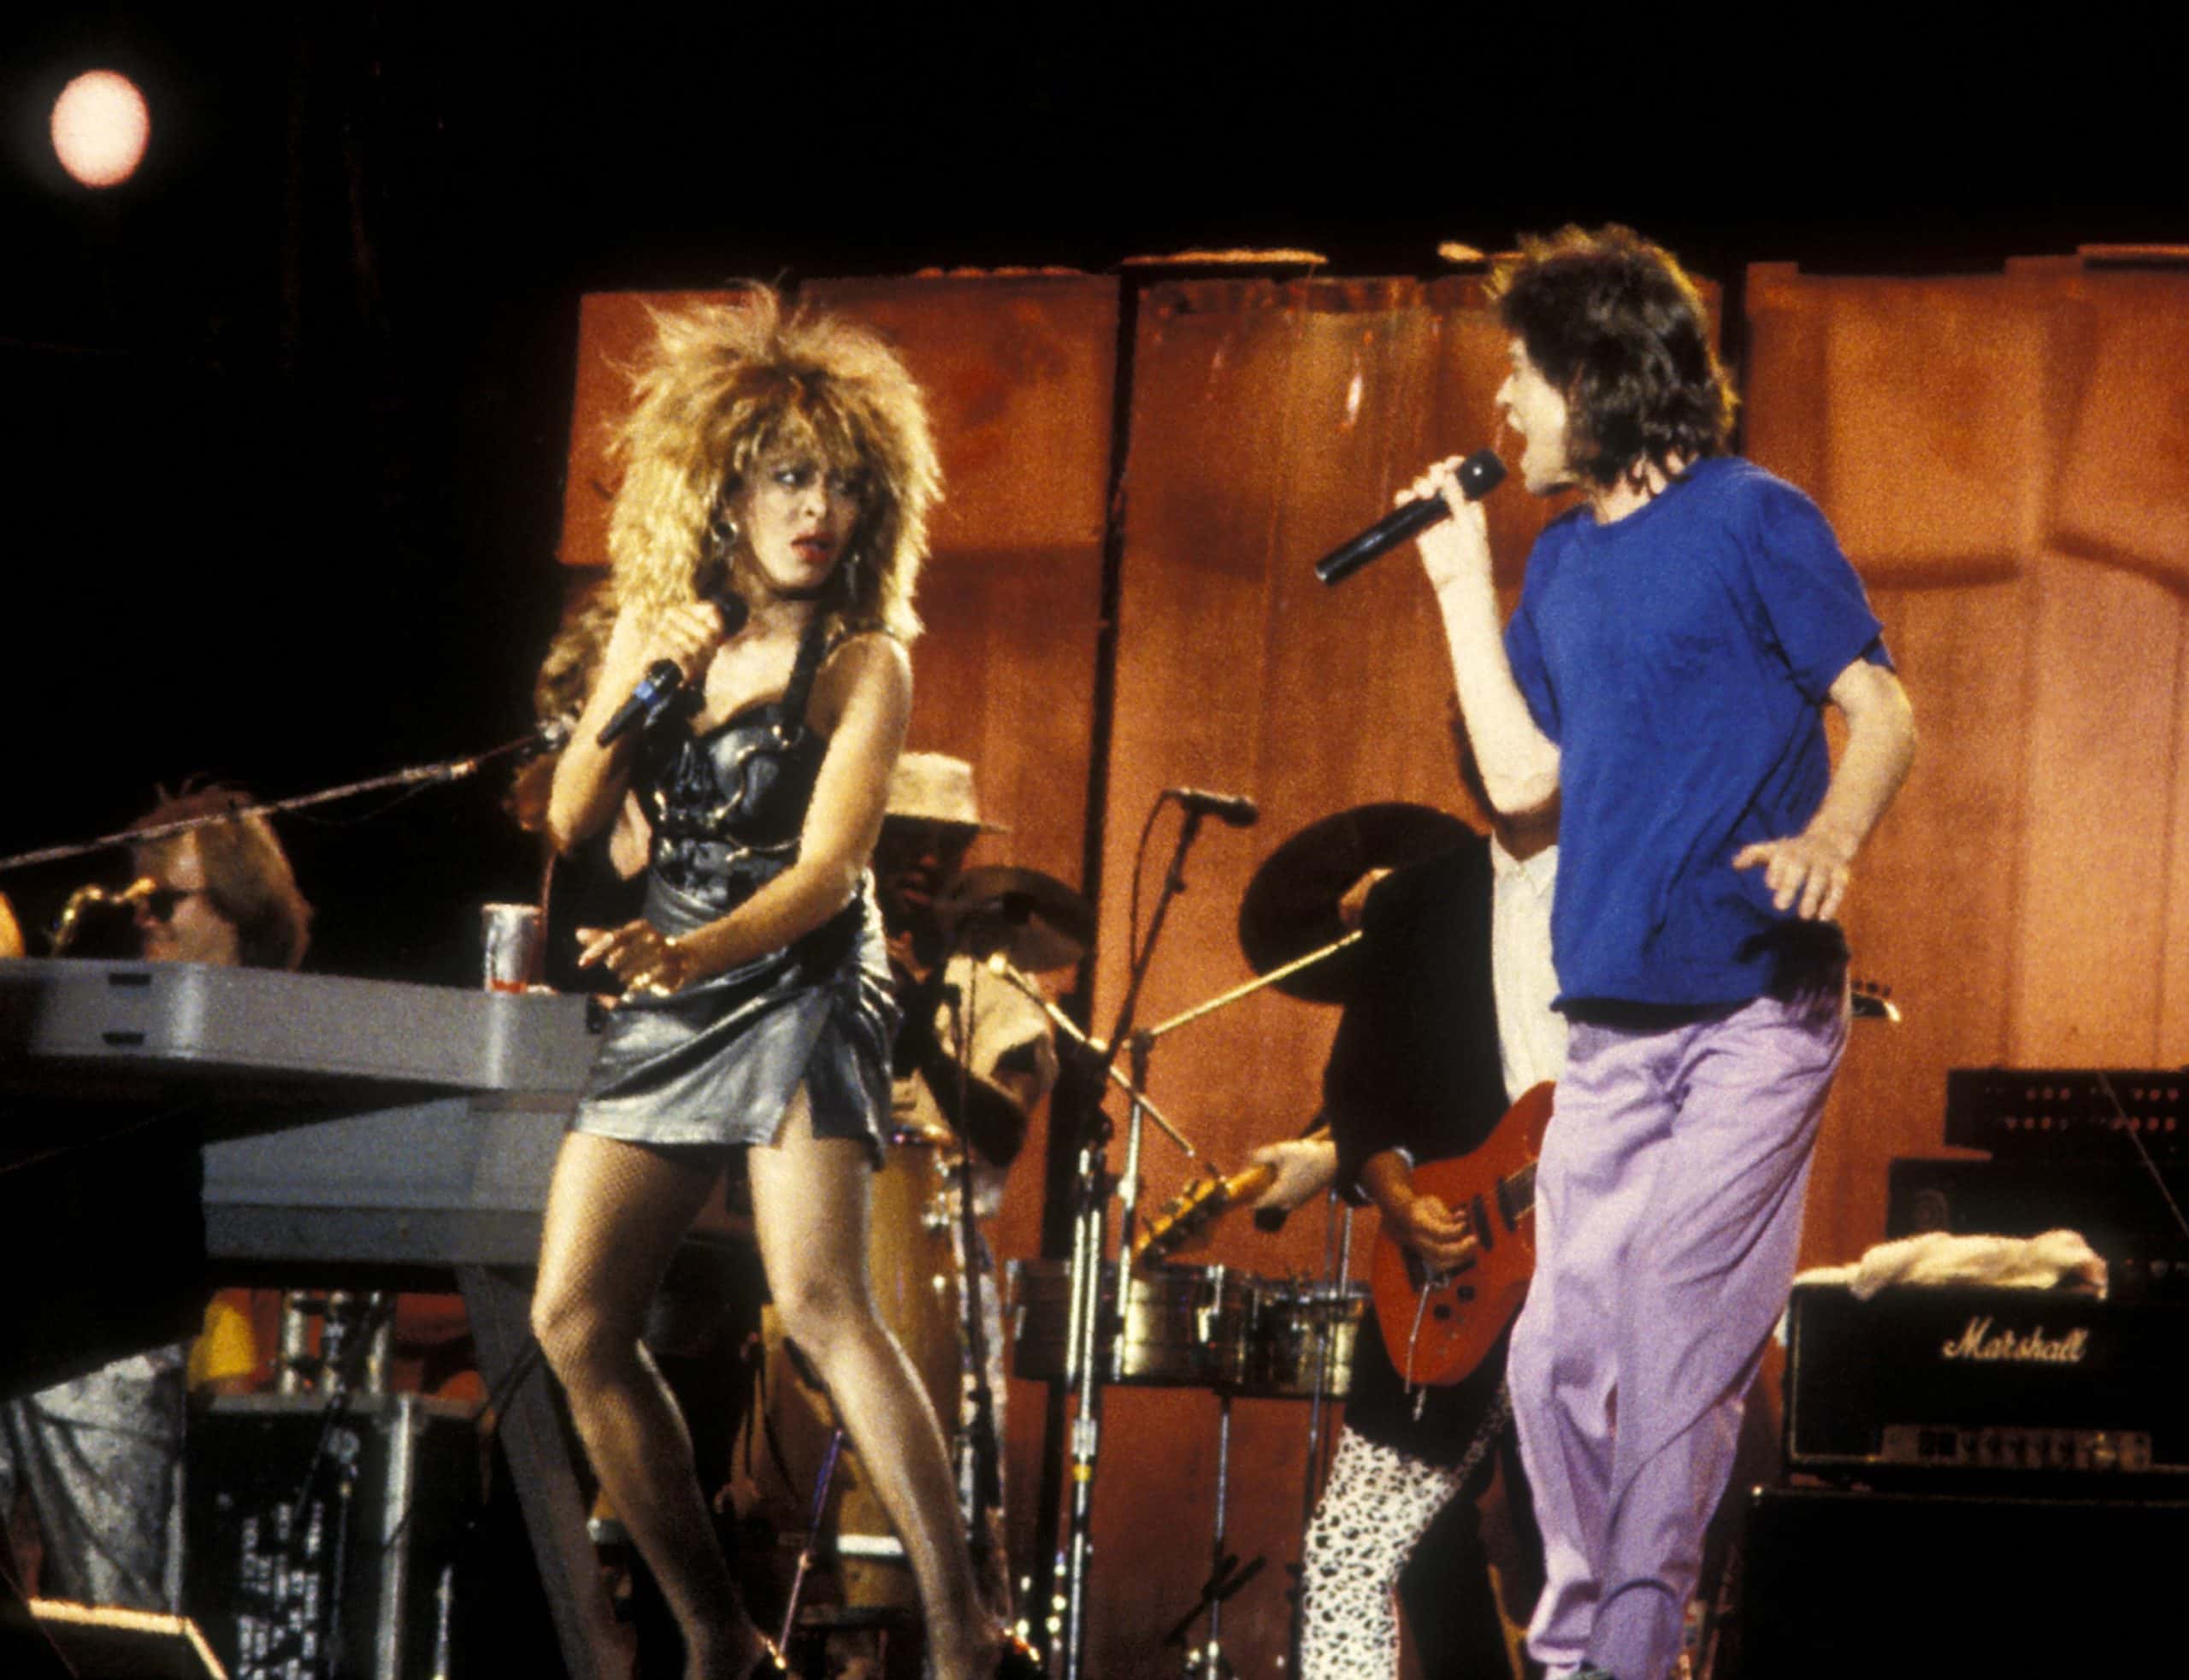 <p>Long before Justin Timberlake and Janet Jackson’s Super Bowl infamy, <strong>Tina made scandalous headlines</strong> <strong>of her own.</strong> In 1985, she performed for the global mega-concert Live Aid. She was singing with Mick Jagger of the Rolling Stones when Jagger ripped off his own shirt and then danced up to Tina and yanked her skirt off. She performed the rest of the song in a black leotard.</p>